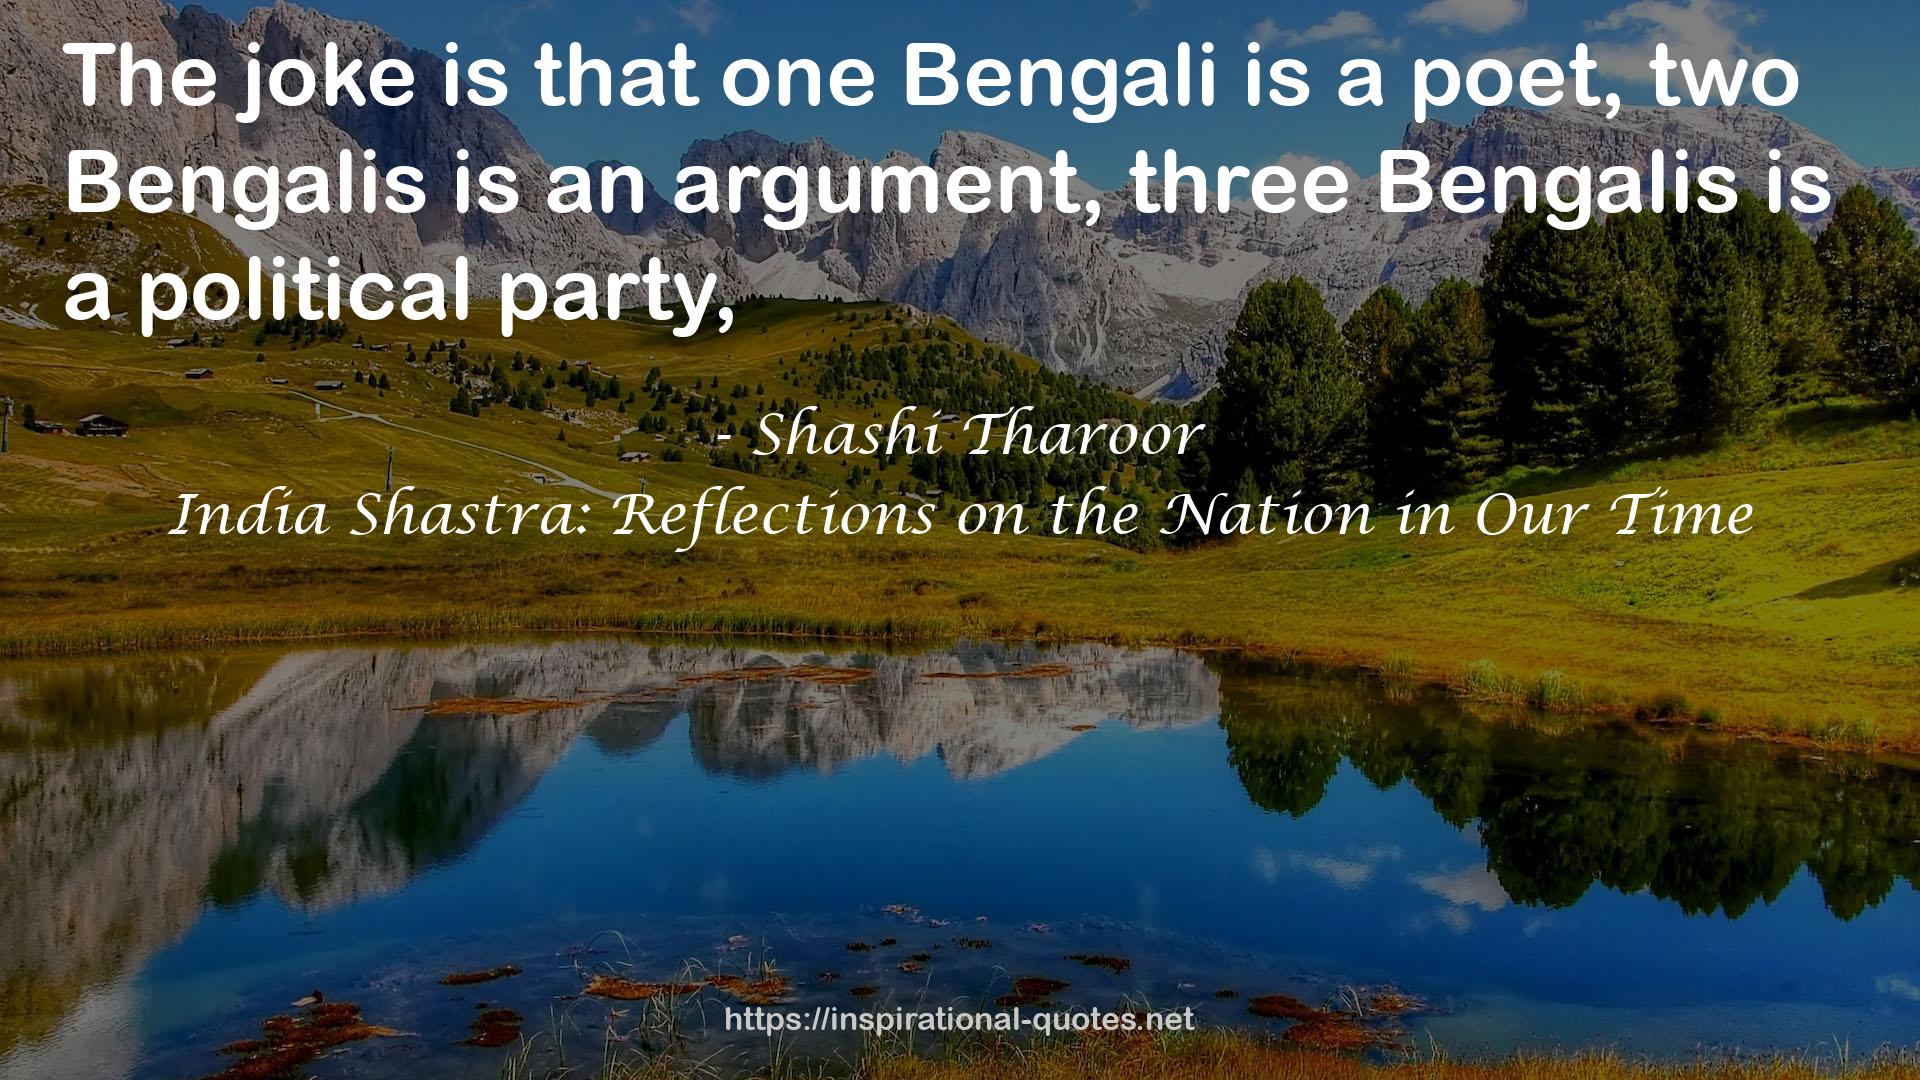 India Shastra: Reflections on the Nation in Our Time QUOTES